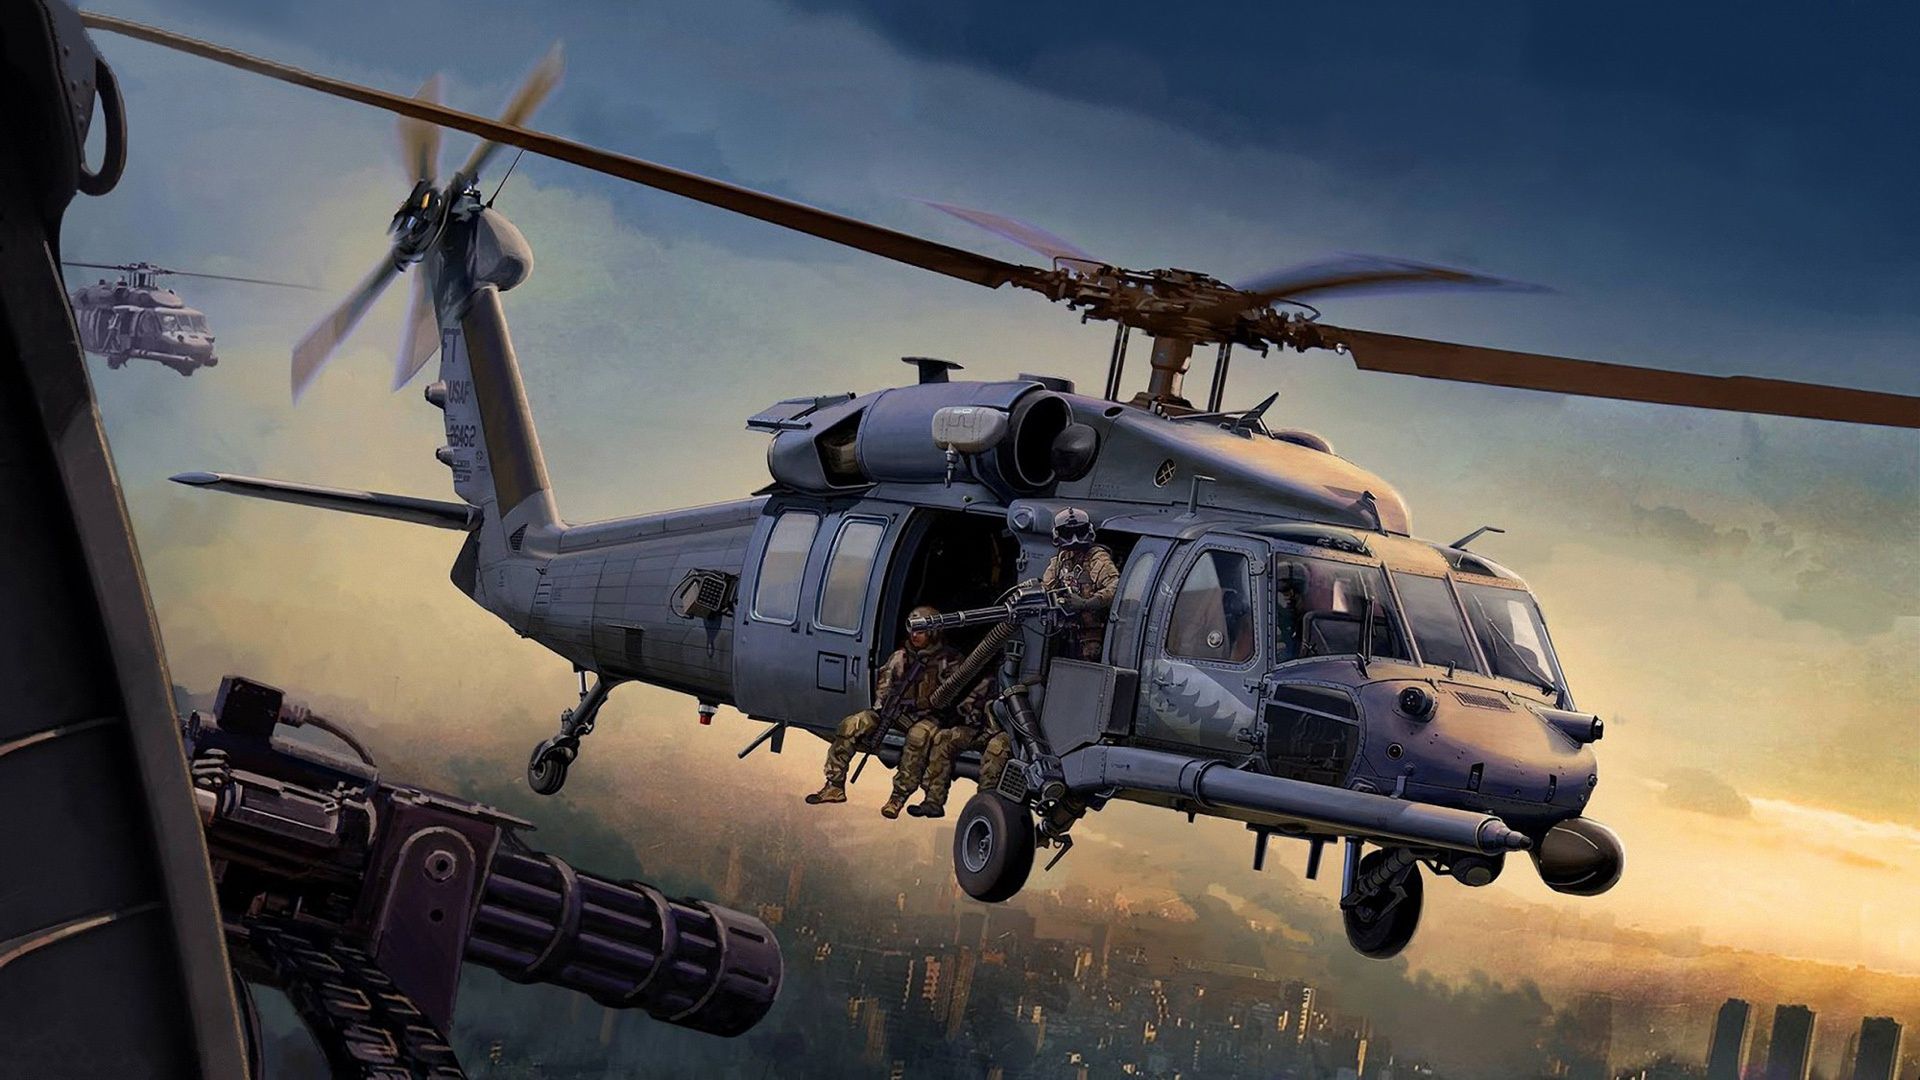 Download Wallpaper Helicopter, Sikorsky, HH 60G, Pave Hawk, US Air Force, Search And Rescue Helicopter, Section Aviat. Военный самолет, Спецназ, Военное искусство